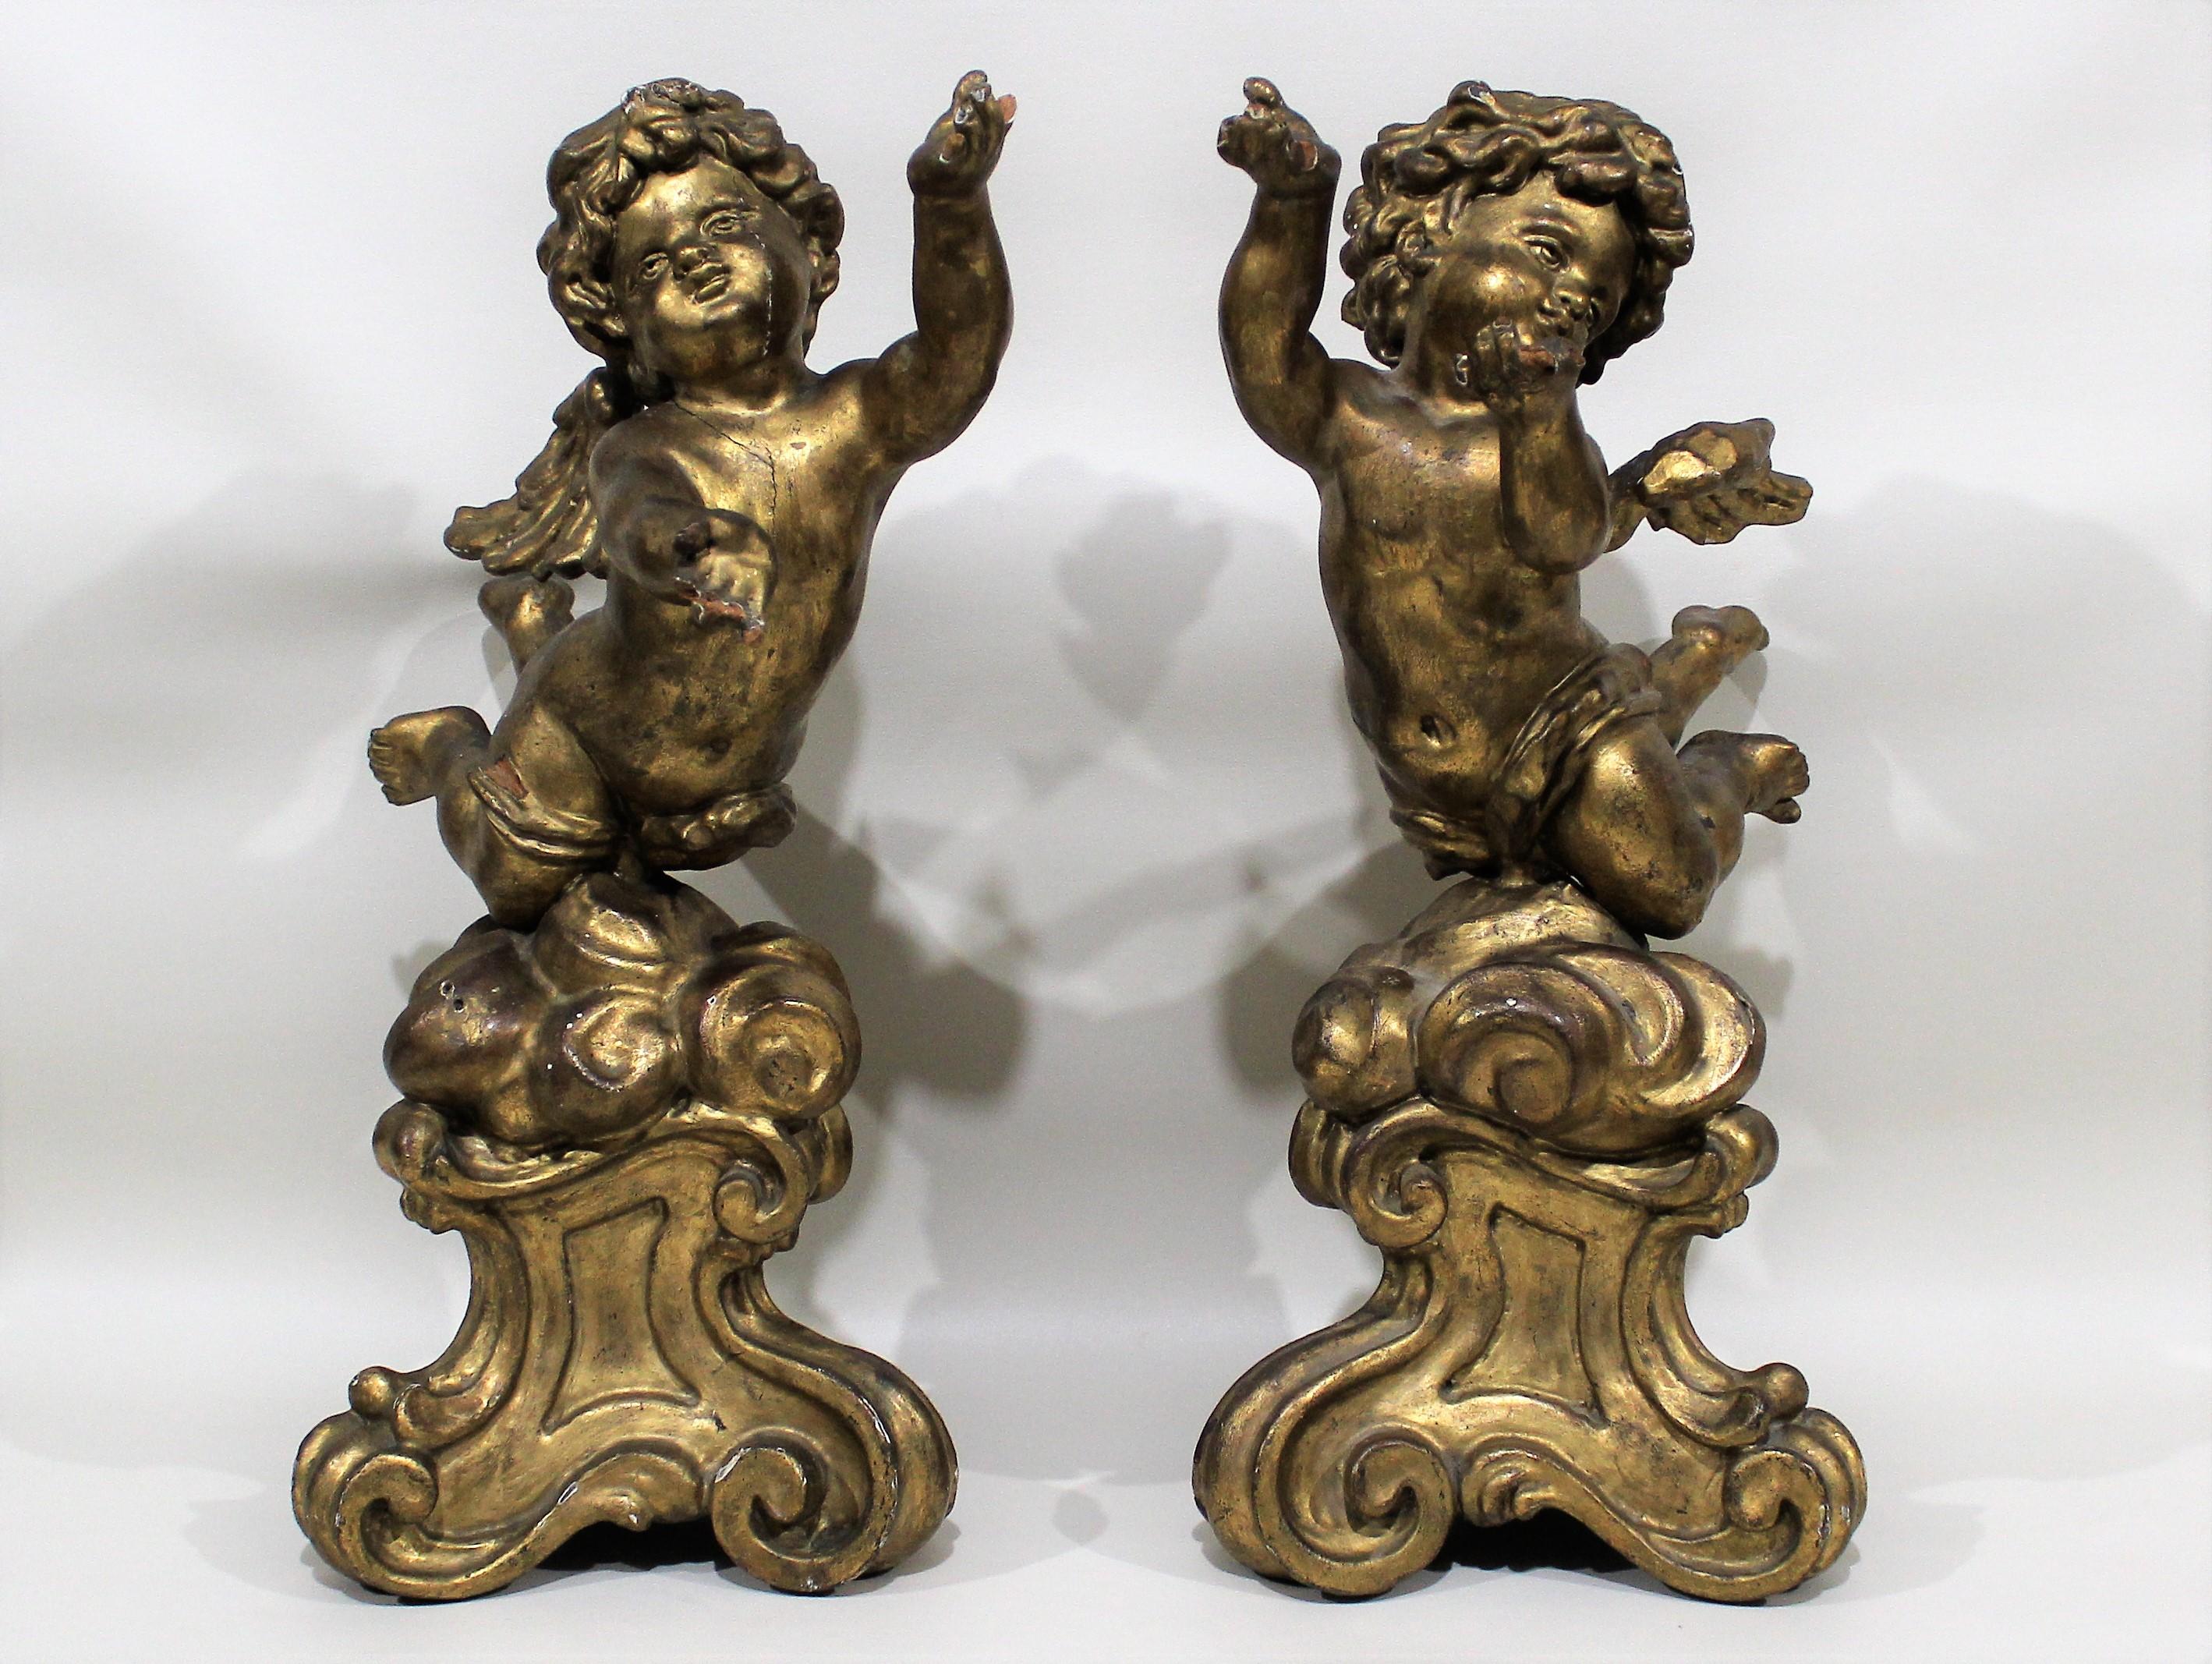 Pair of gilt carved wood putti figures atop decorative tripod bases.